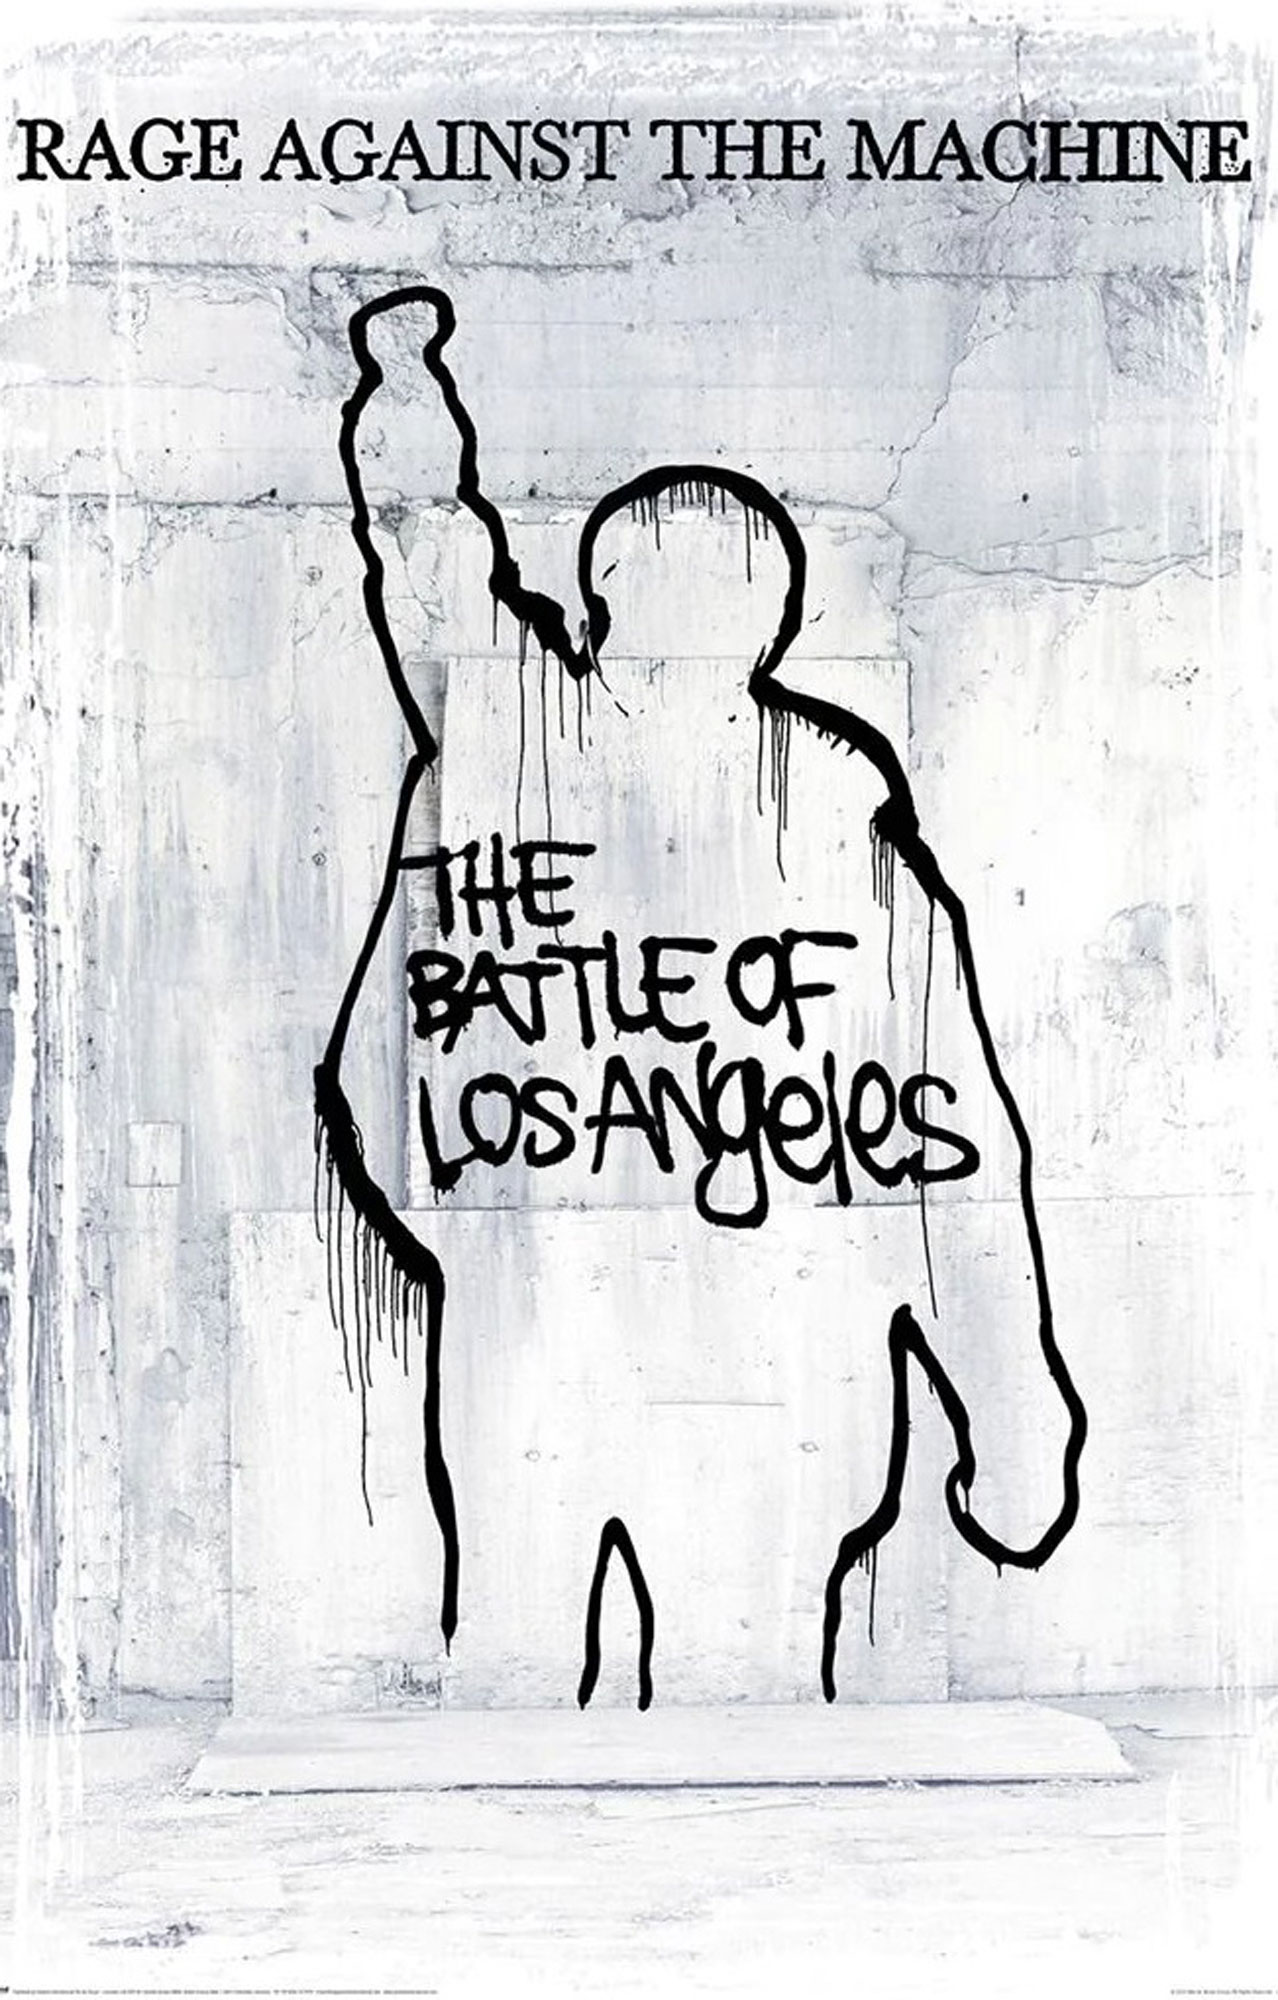 Battle - Rage Machine Angeles Los The for The Against